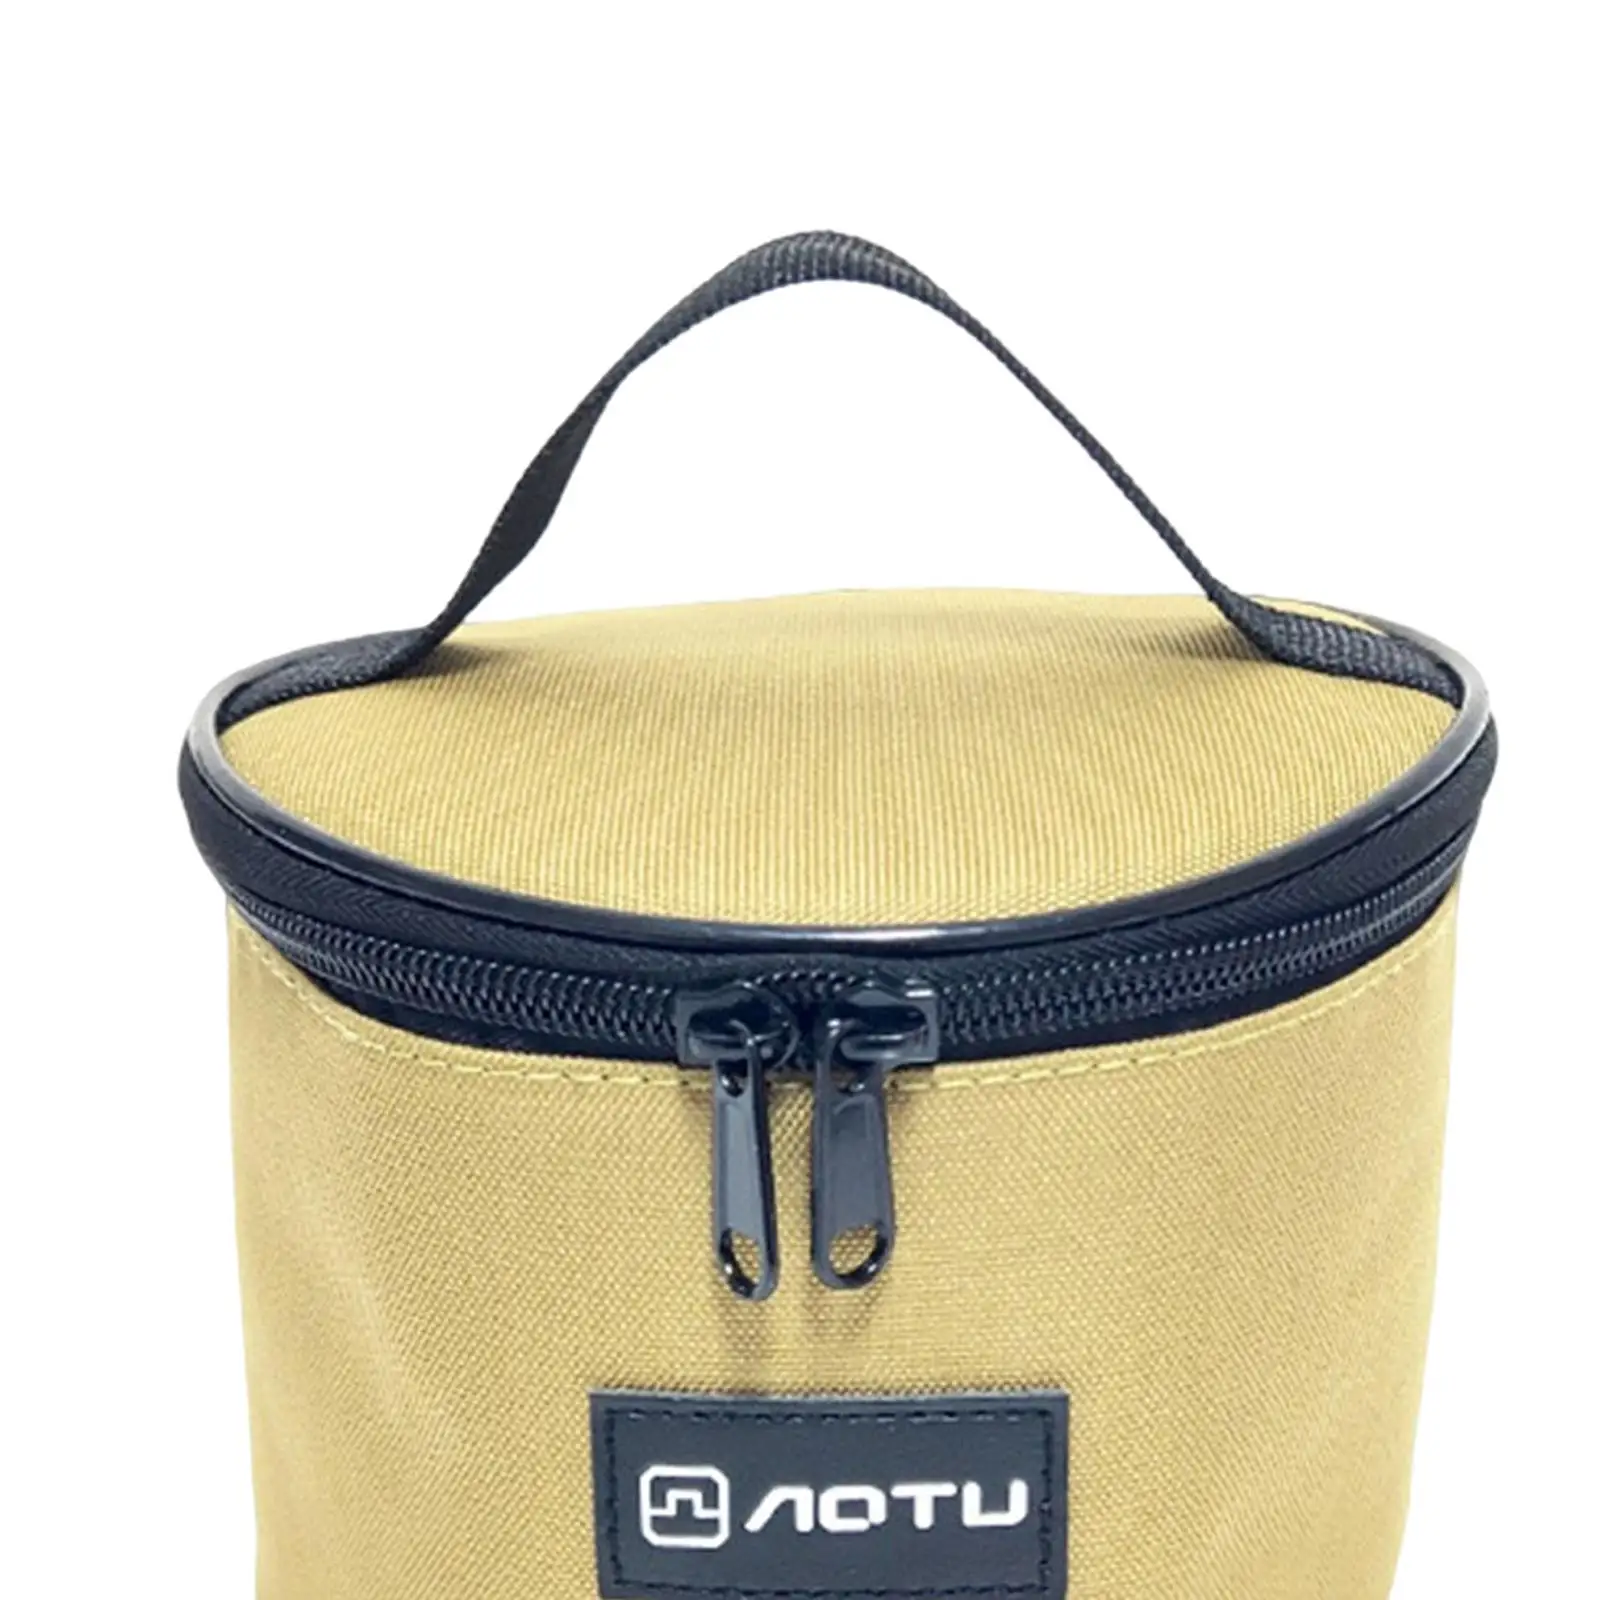 Oxford Bowl Storage Bag with Handle Waterproof Organizer Hanging Carry Case Camping Outdoor Pouch for Picnic Travel Fishing